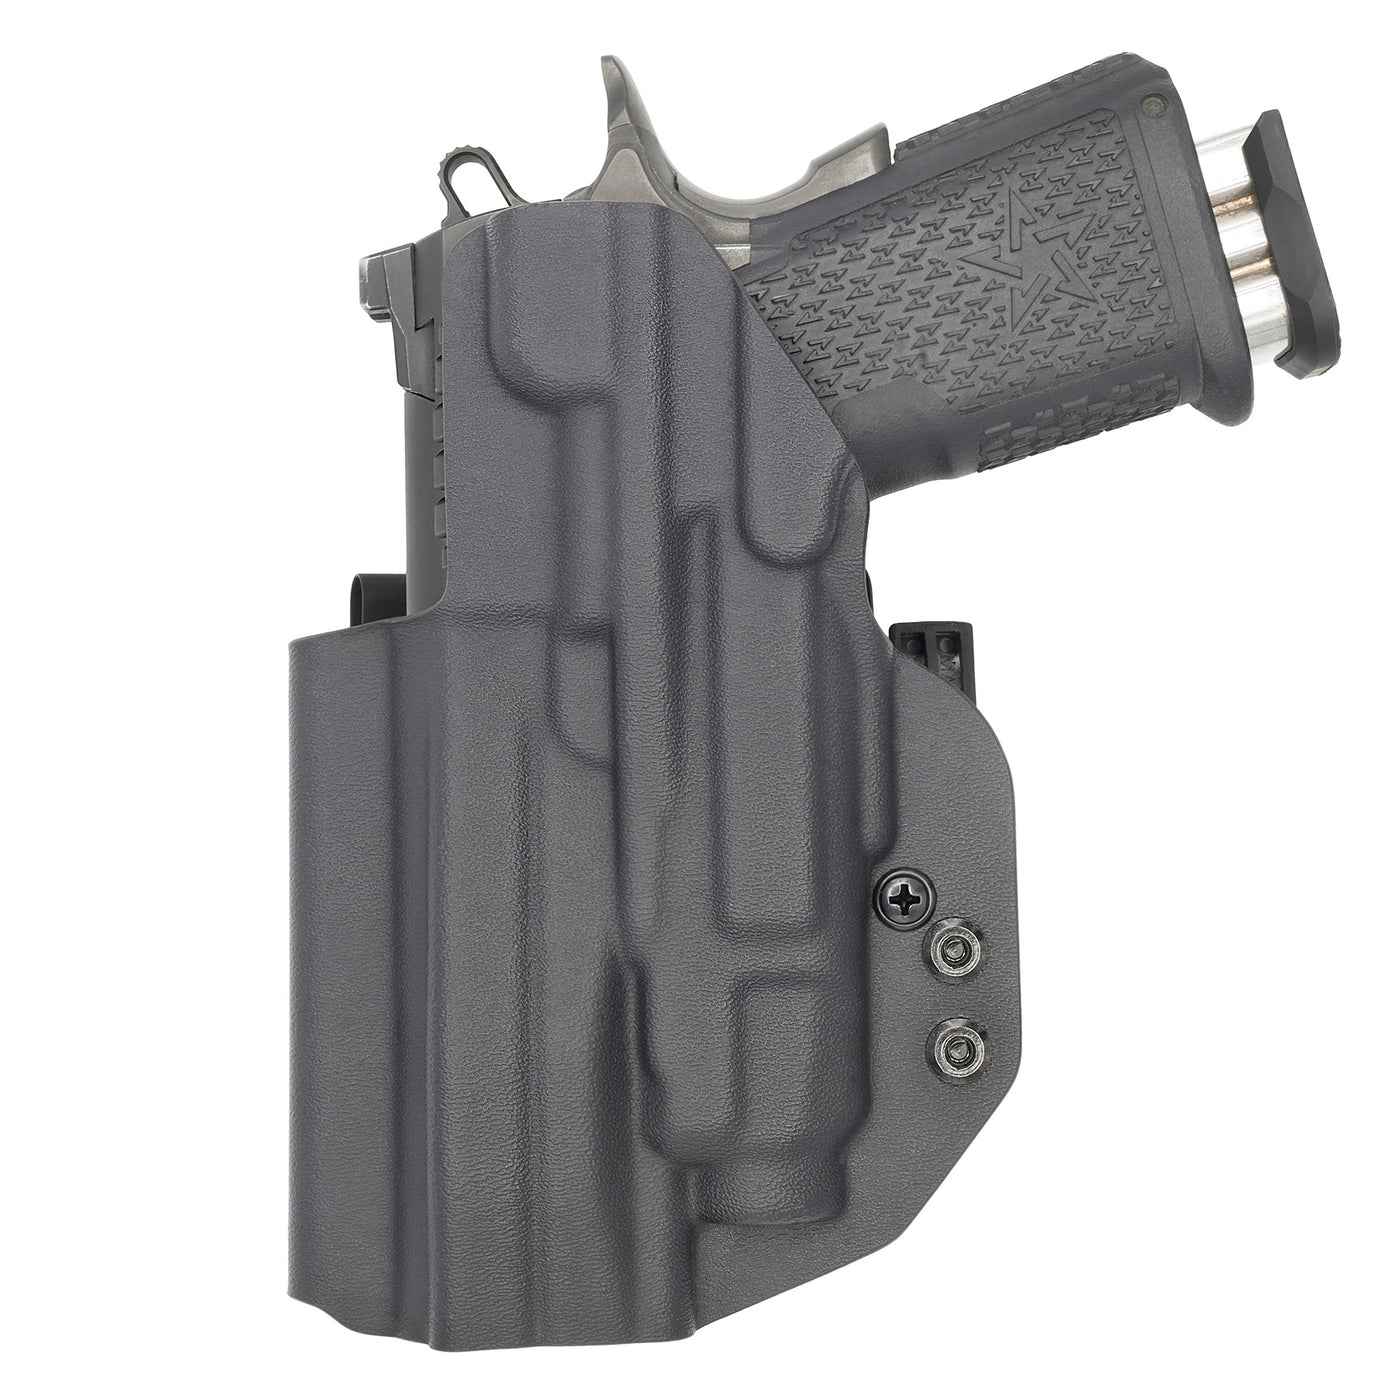 C&G Holsters Quickship IWB ALPHA UPGRADE Tactical 2011 Streamlight TLR7/a in holstered position back view